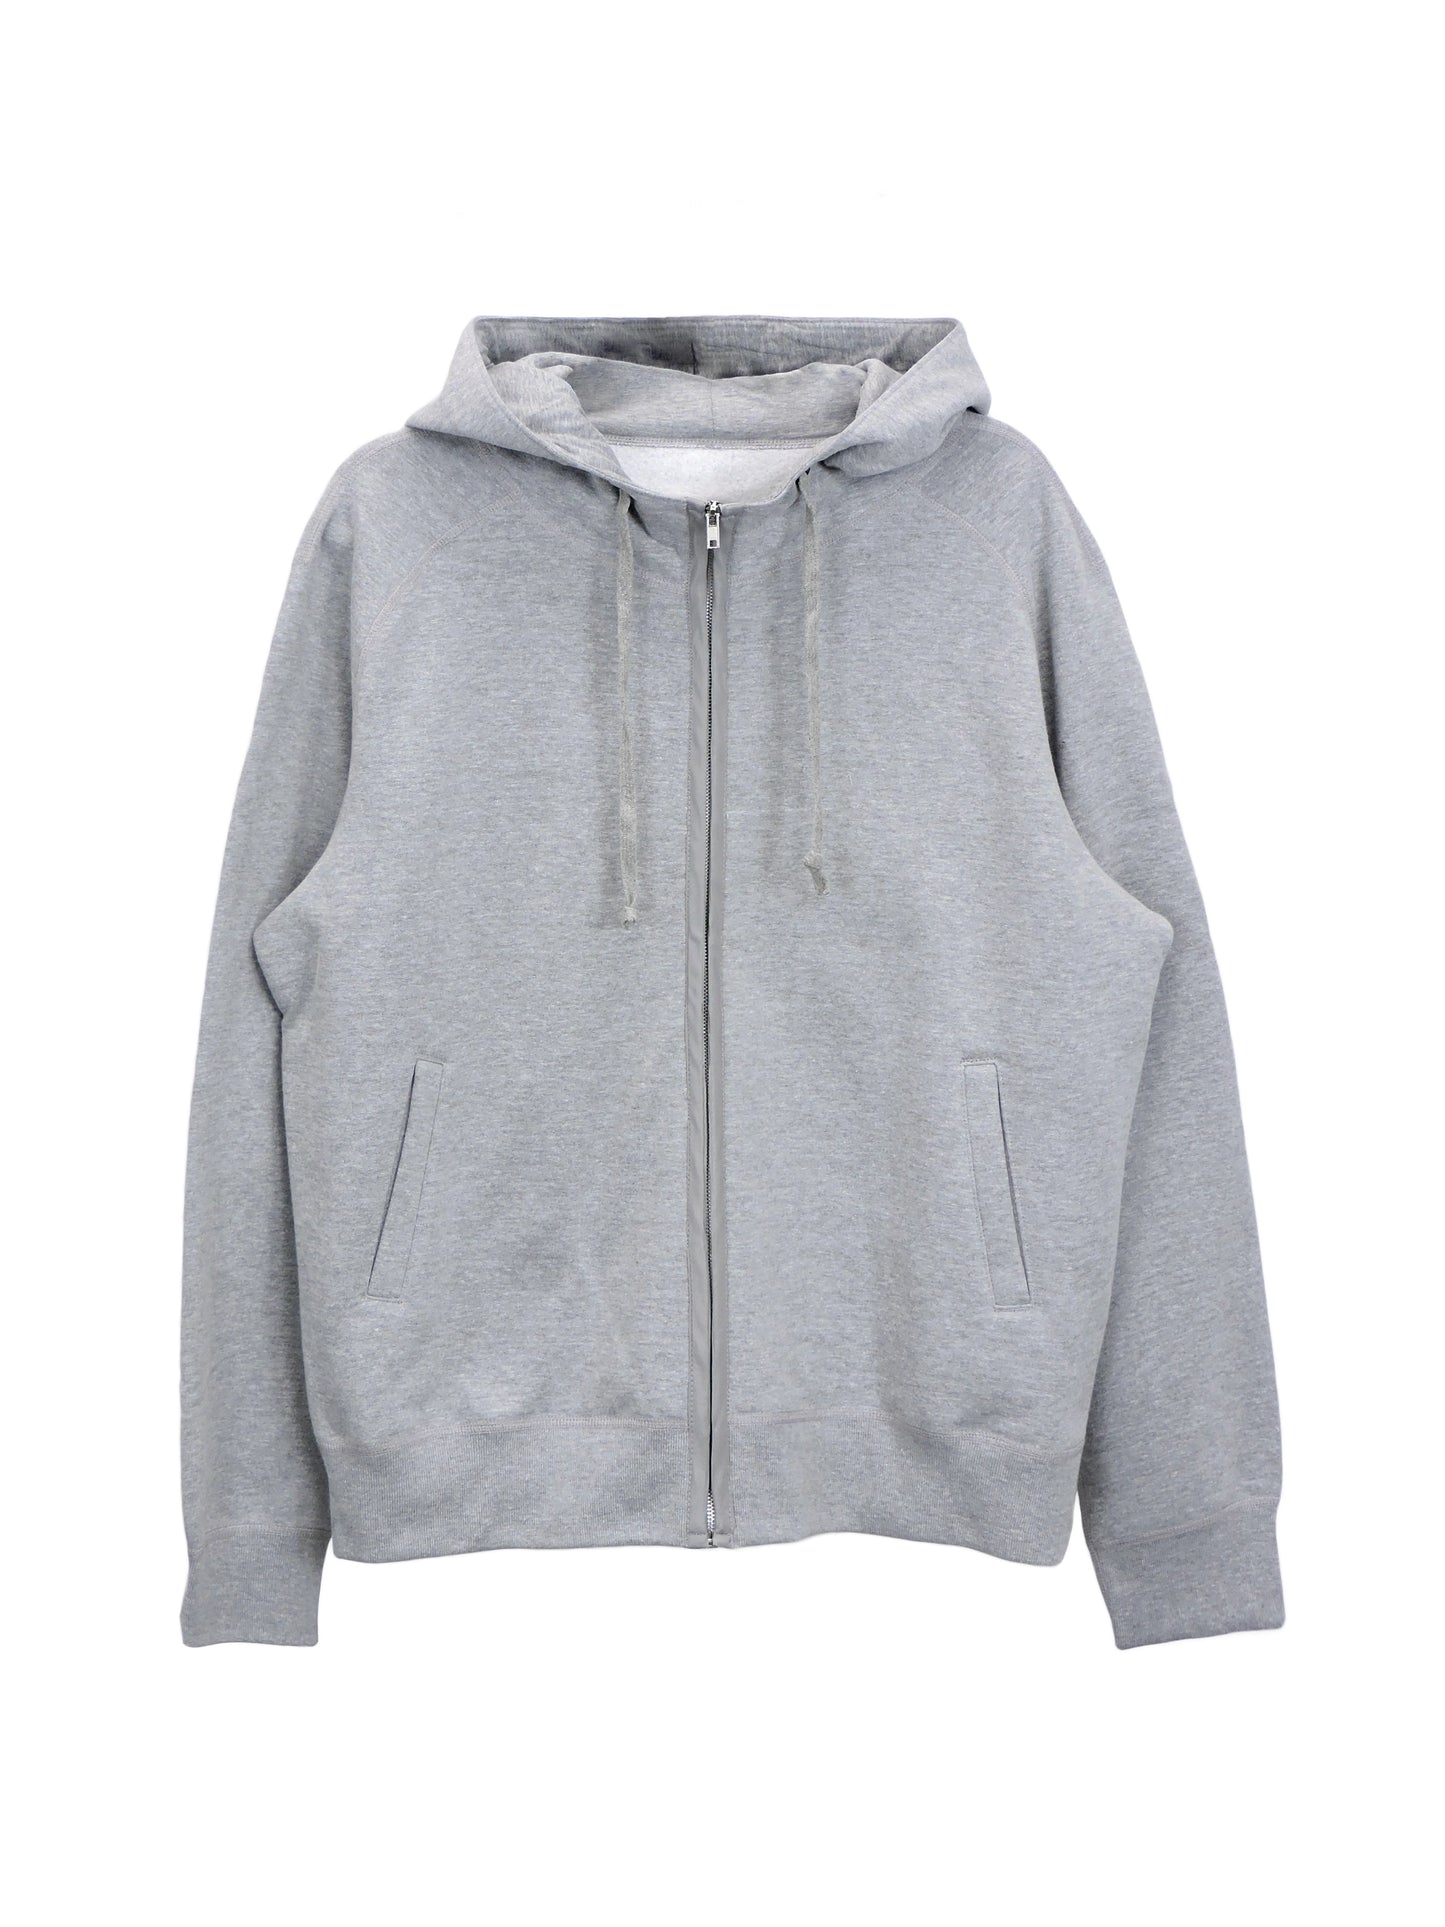 Heather Grey Fleece Hoodie with Front Zipper and Zippable Up Pockets